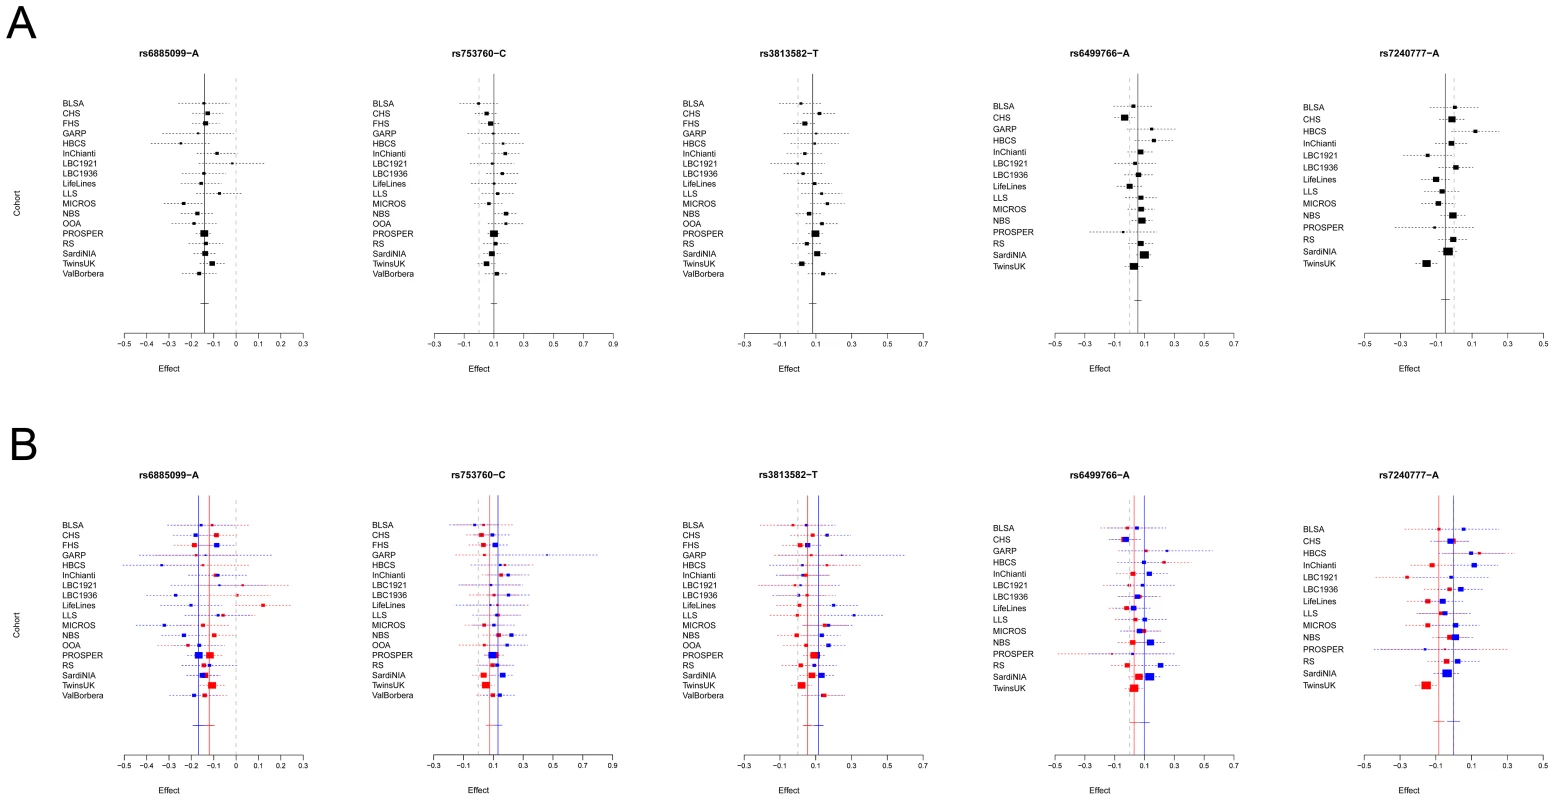 Forest plot of SNPs with gender-specific effects.